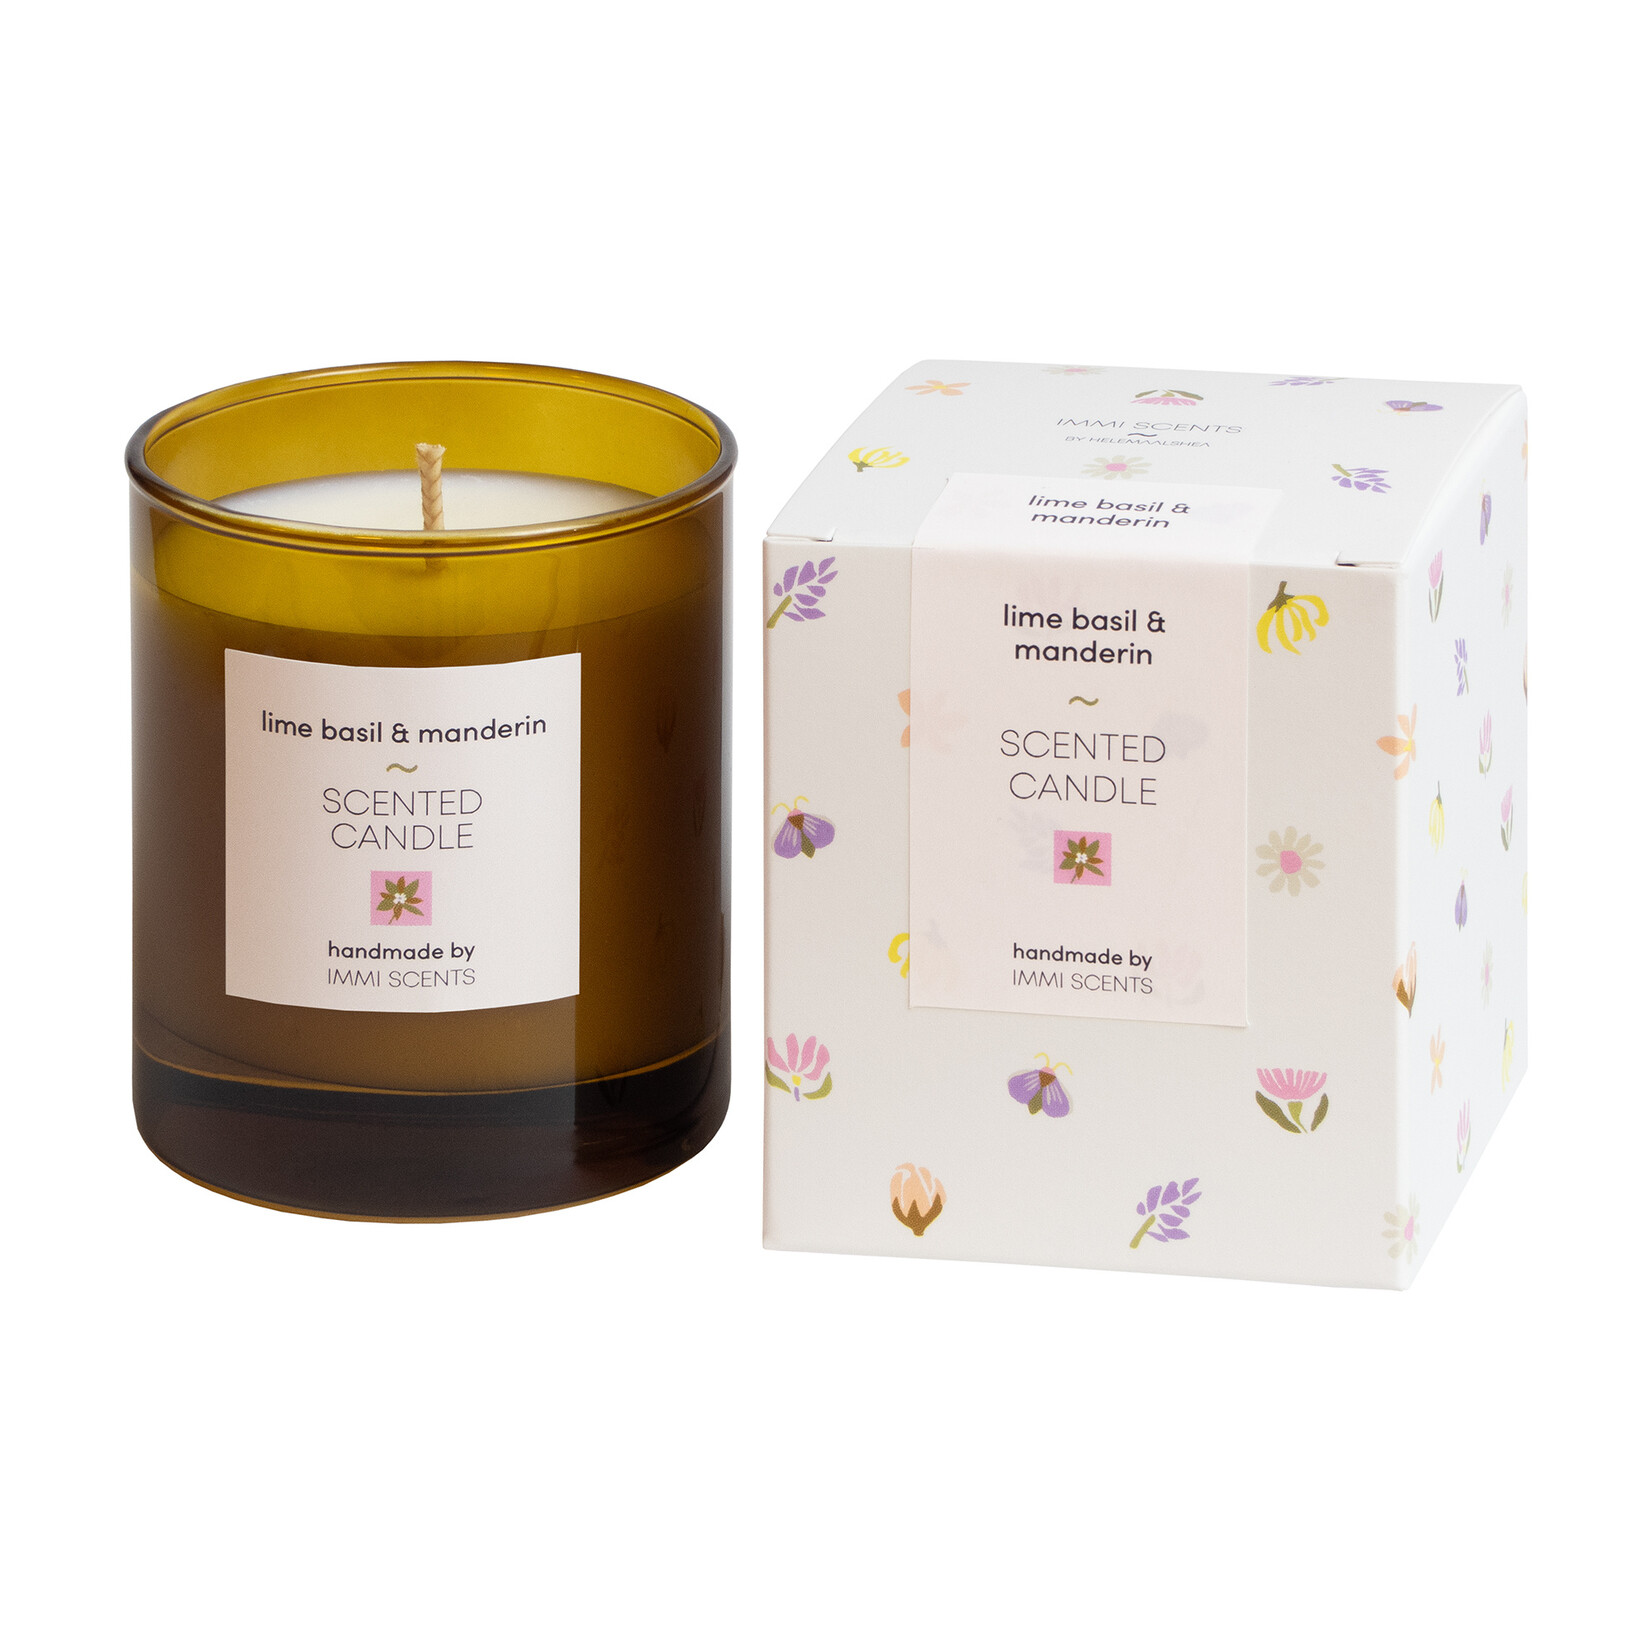 Scented candle - Lime, Basil & Mandarin - amber